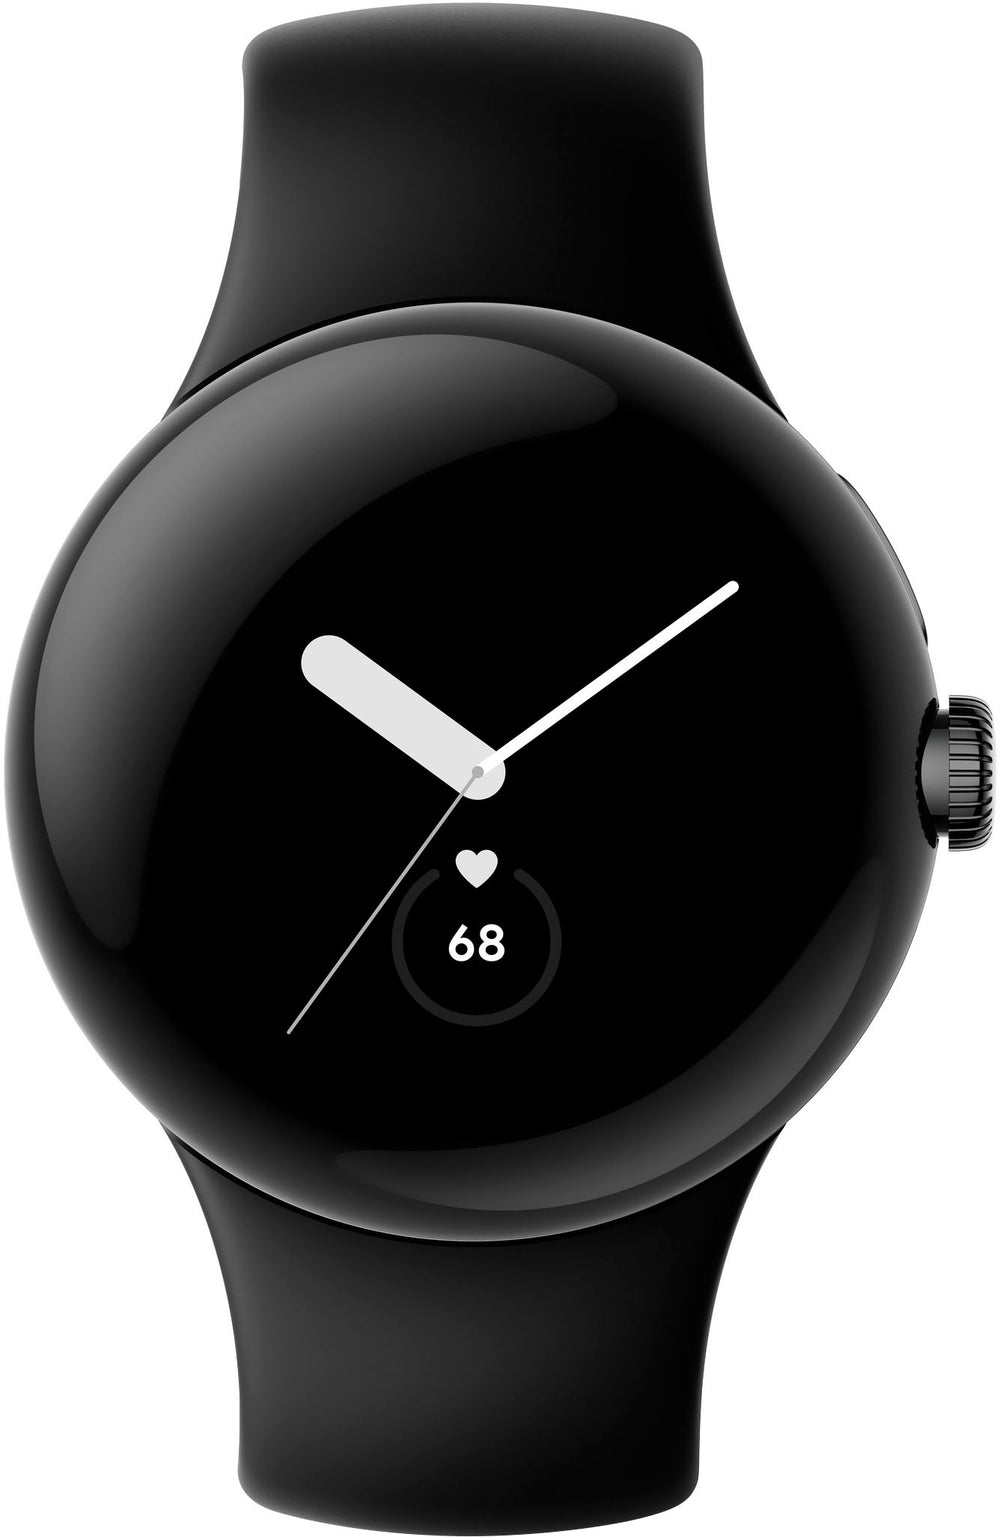 Google - Pixel Watch Black Stainless Steel Smartwatch 41mm with Obsidian Active Band Wifi/BT - Black/Obsidian_1